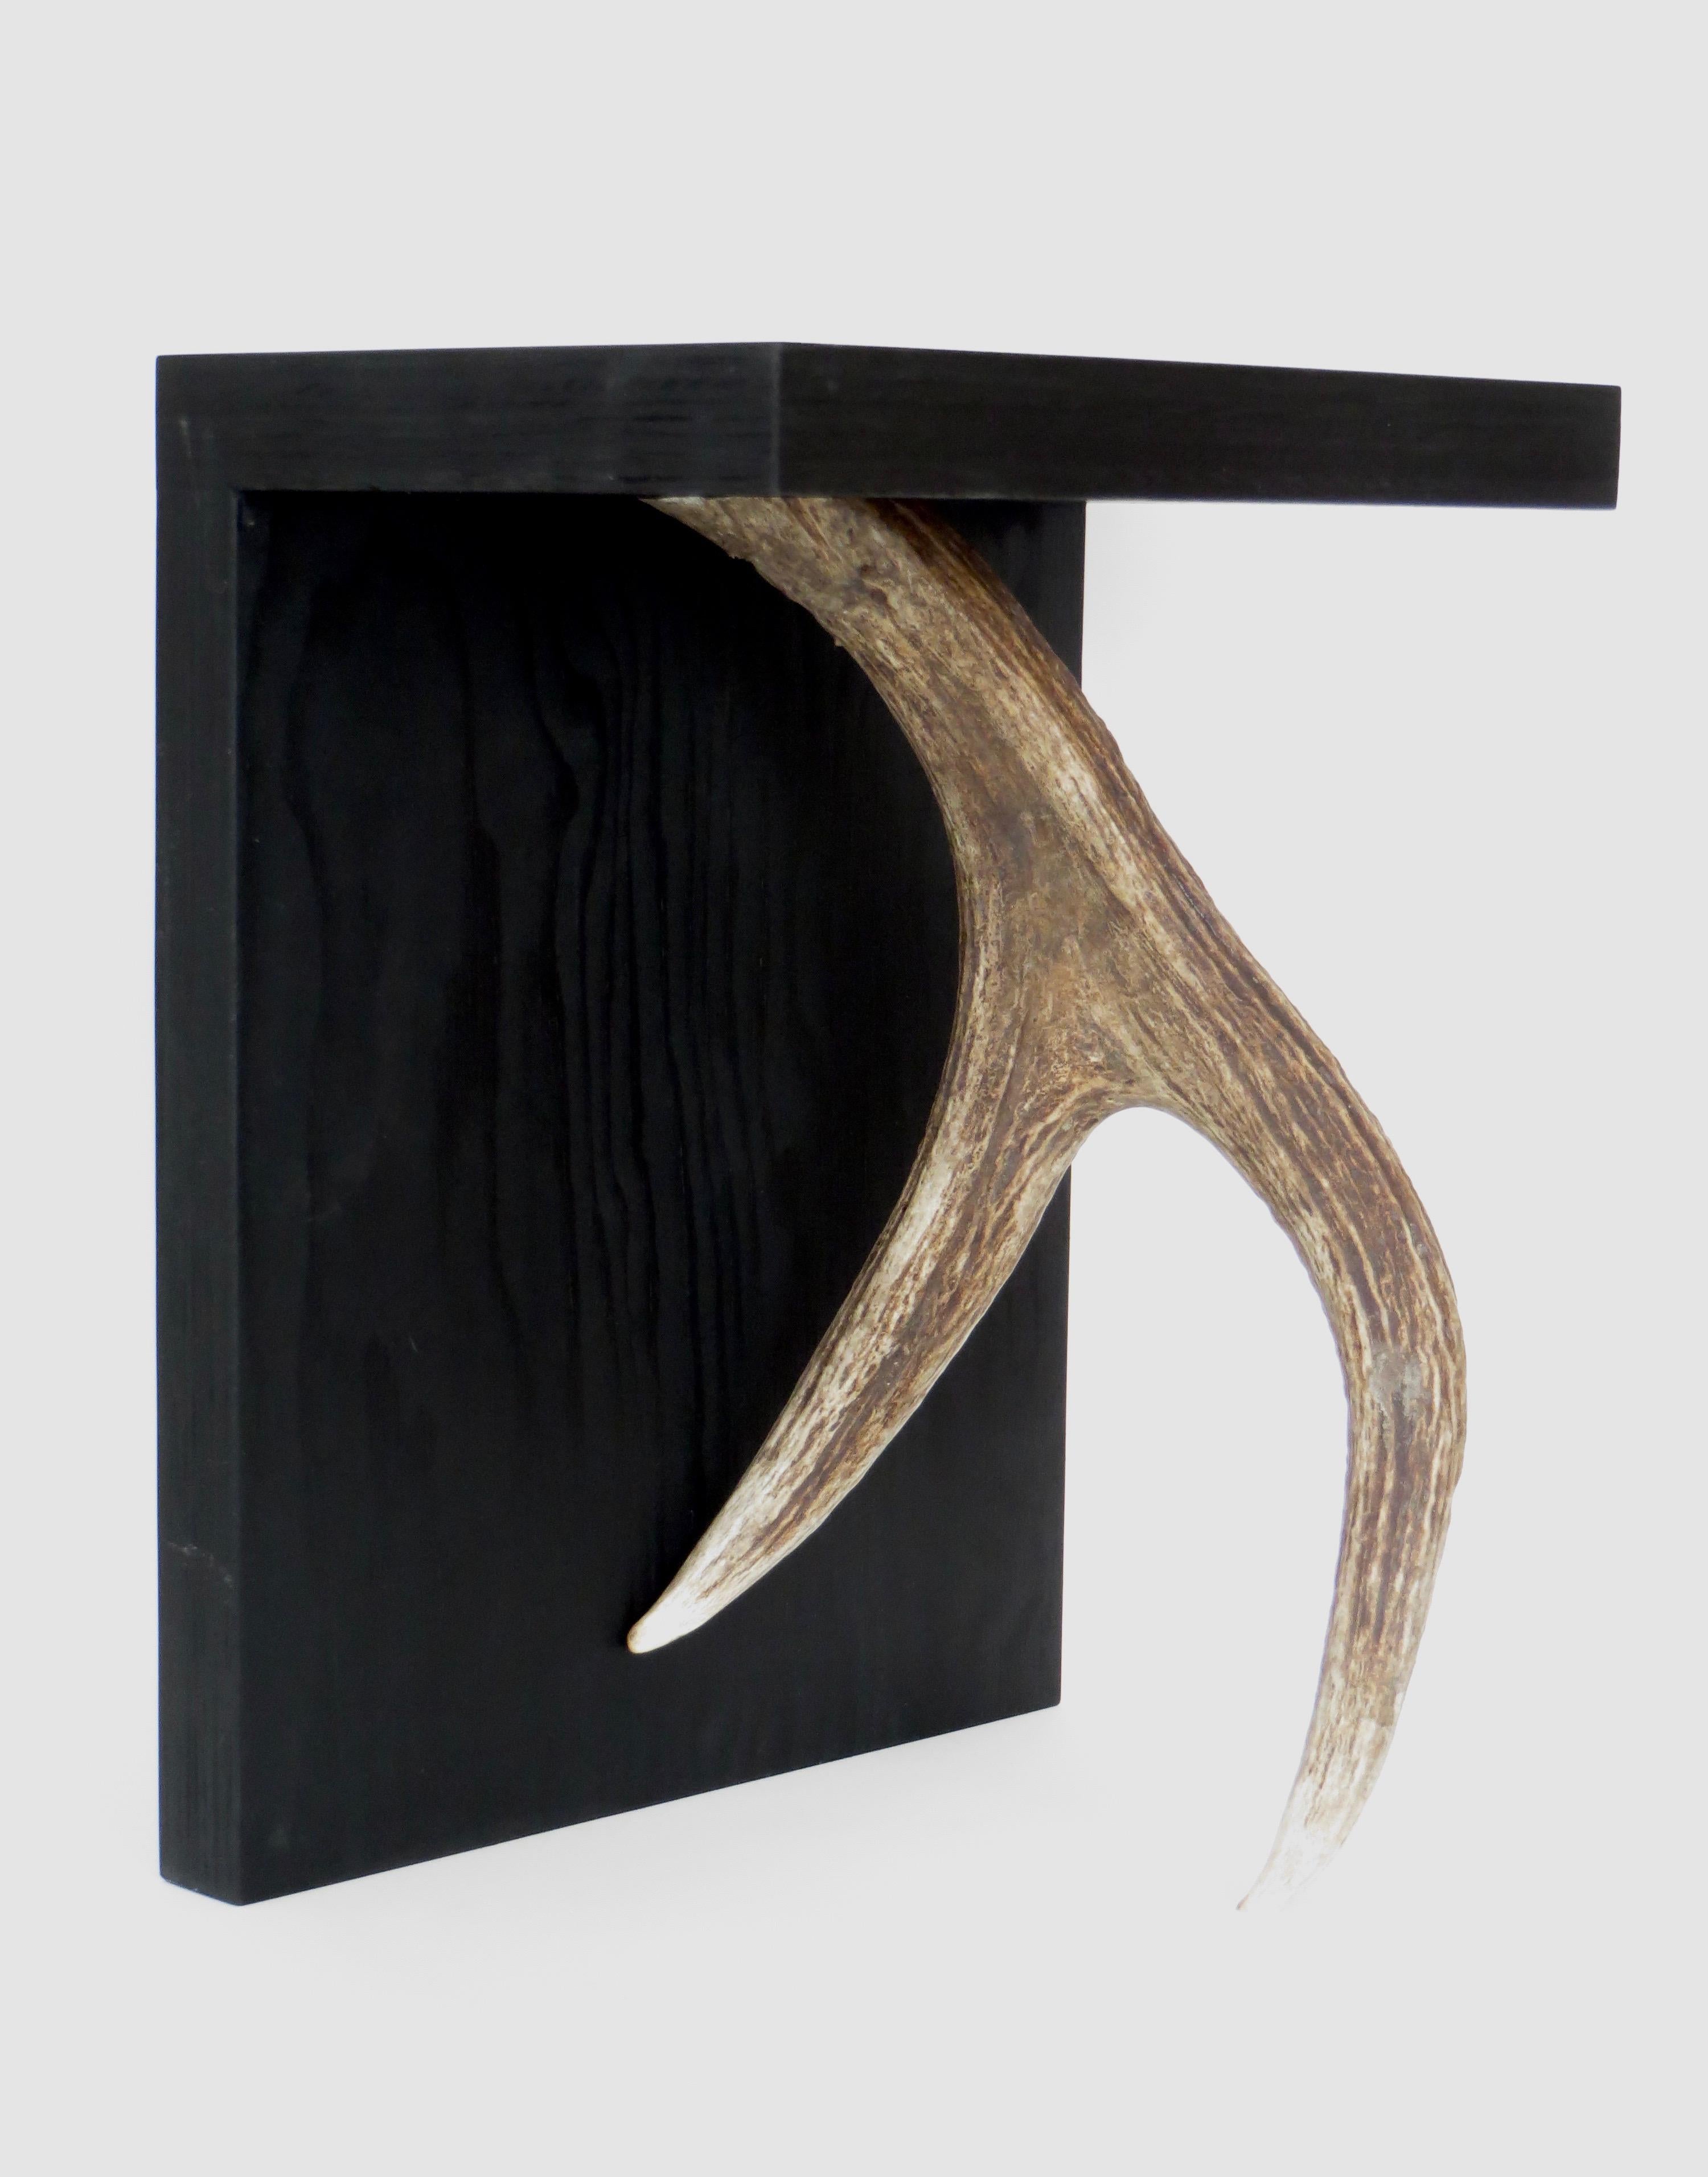 Black ebonized stained solid plywood forms with elk or moose antler.
Iconic rick Owens use of natural and organic modern materials.
These are from the open edition series.
Each stool is signed on the base and is a piece unique.
May be used as